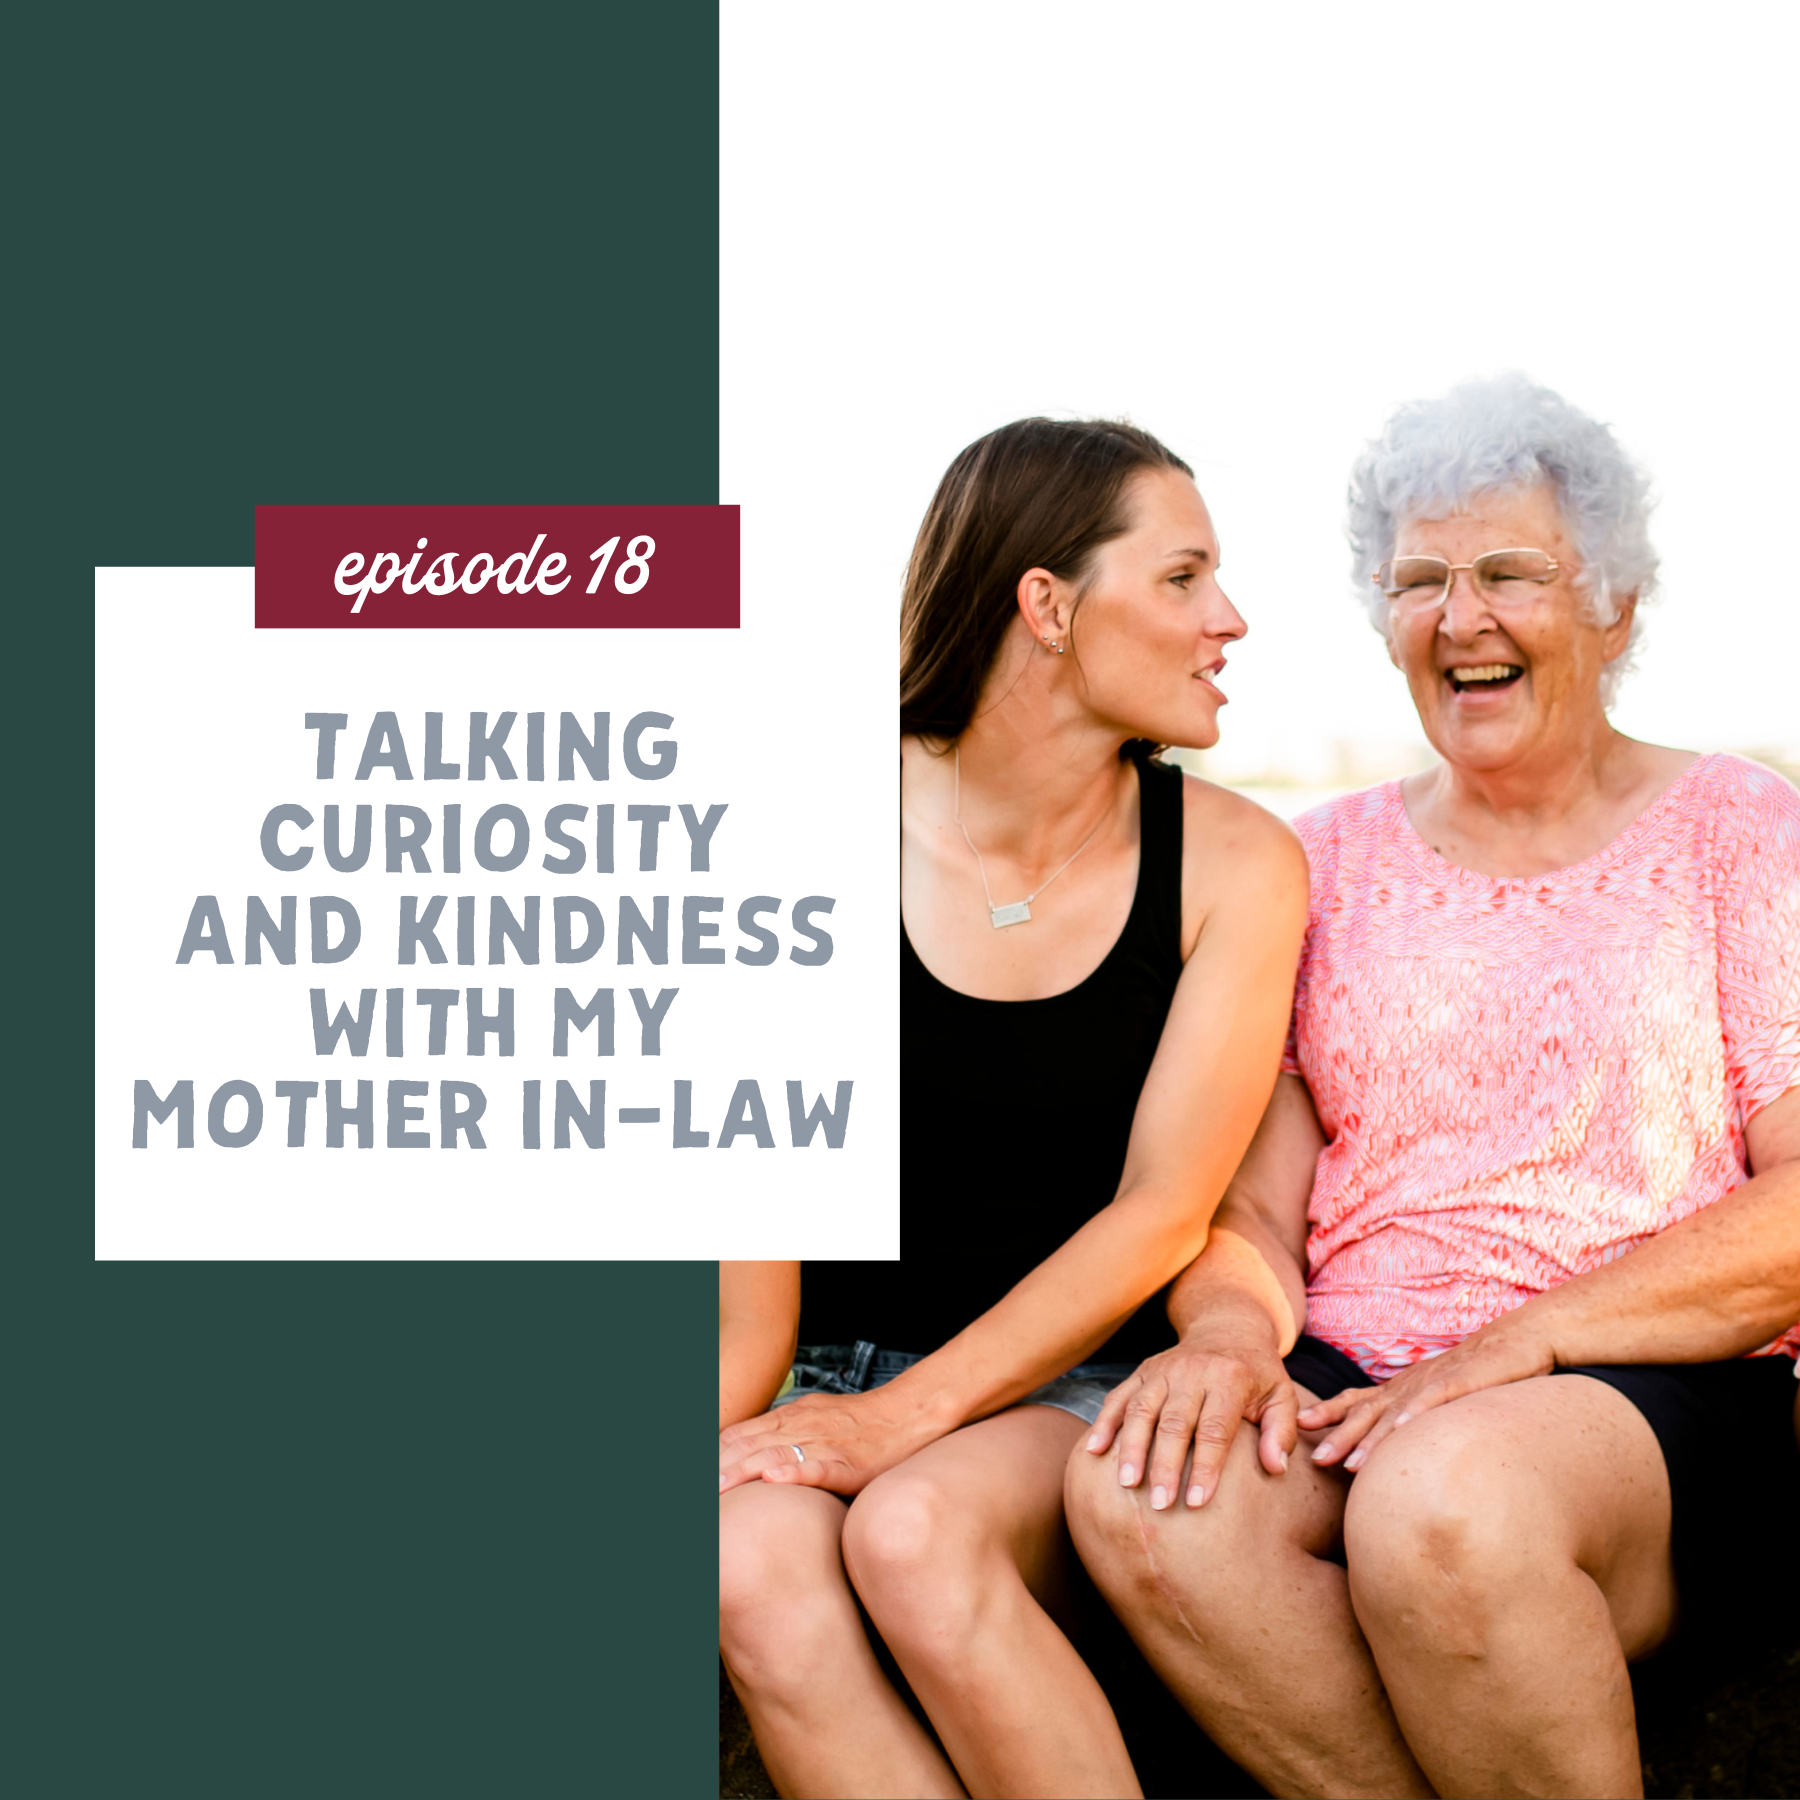 Talking Curiosity and Kindness with My Mother In-Law [episode 18]